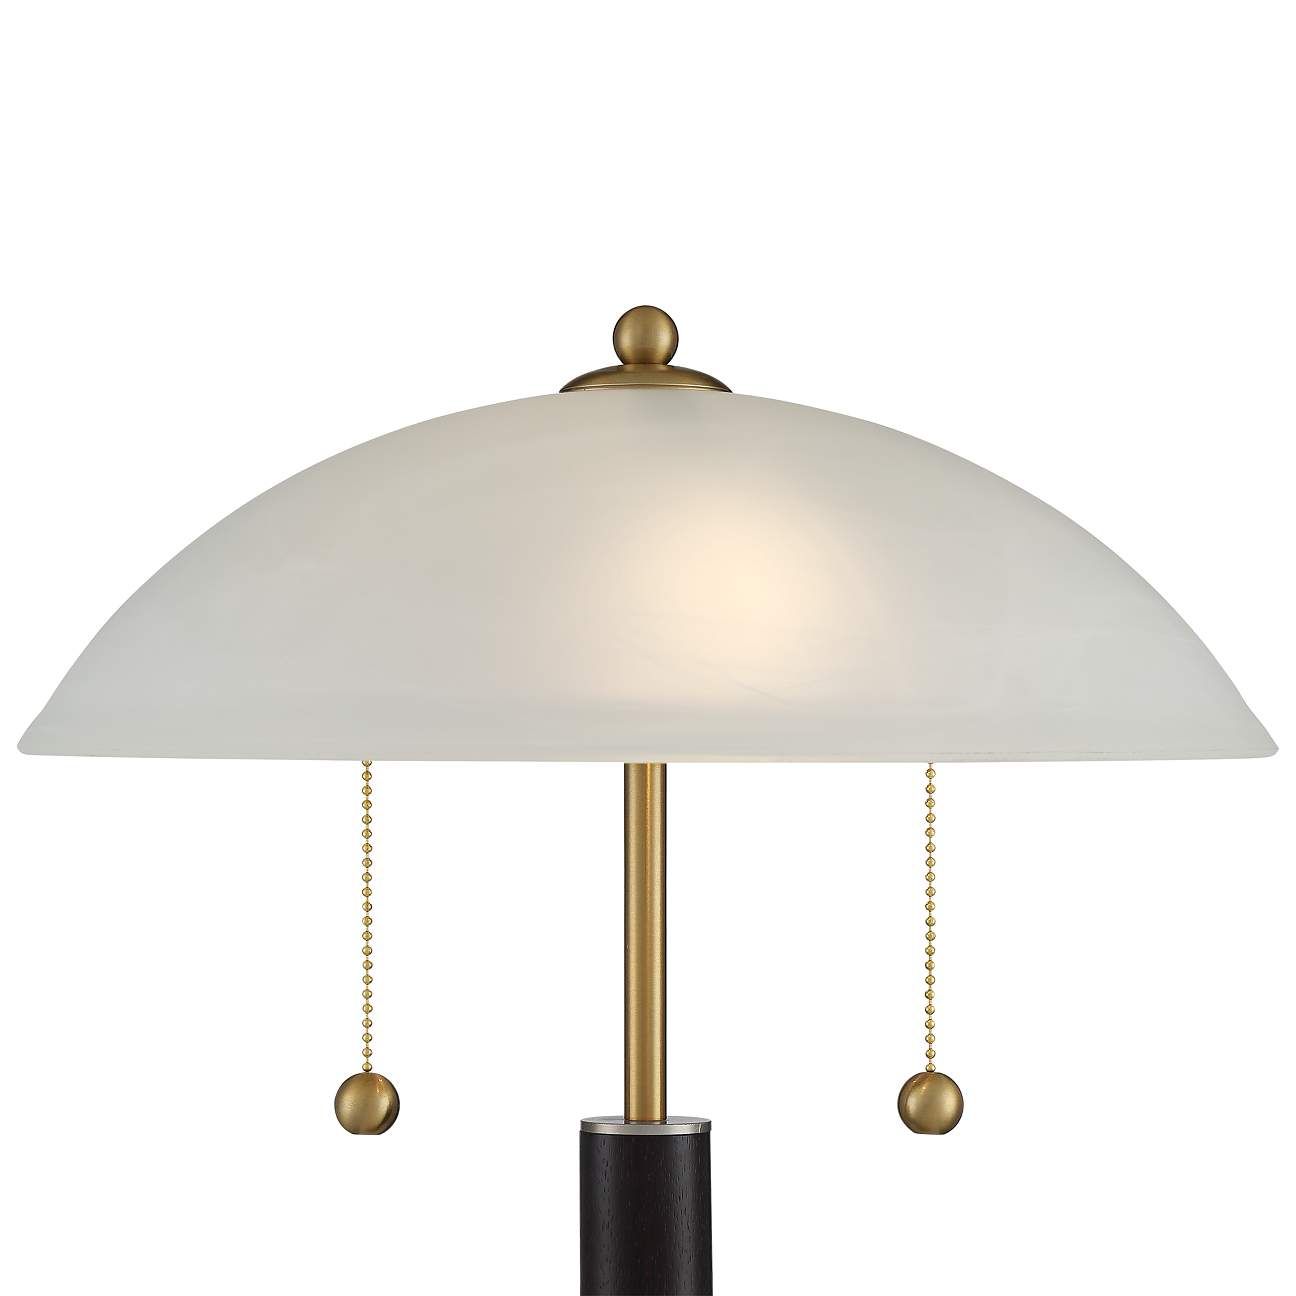 Orbital 19 1/2" High Wood and Warm Gold Pull Chain Desk Lamp | Lamps Plus